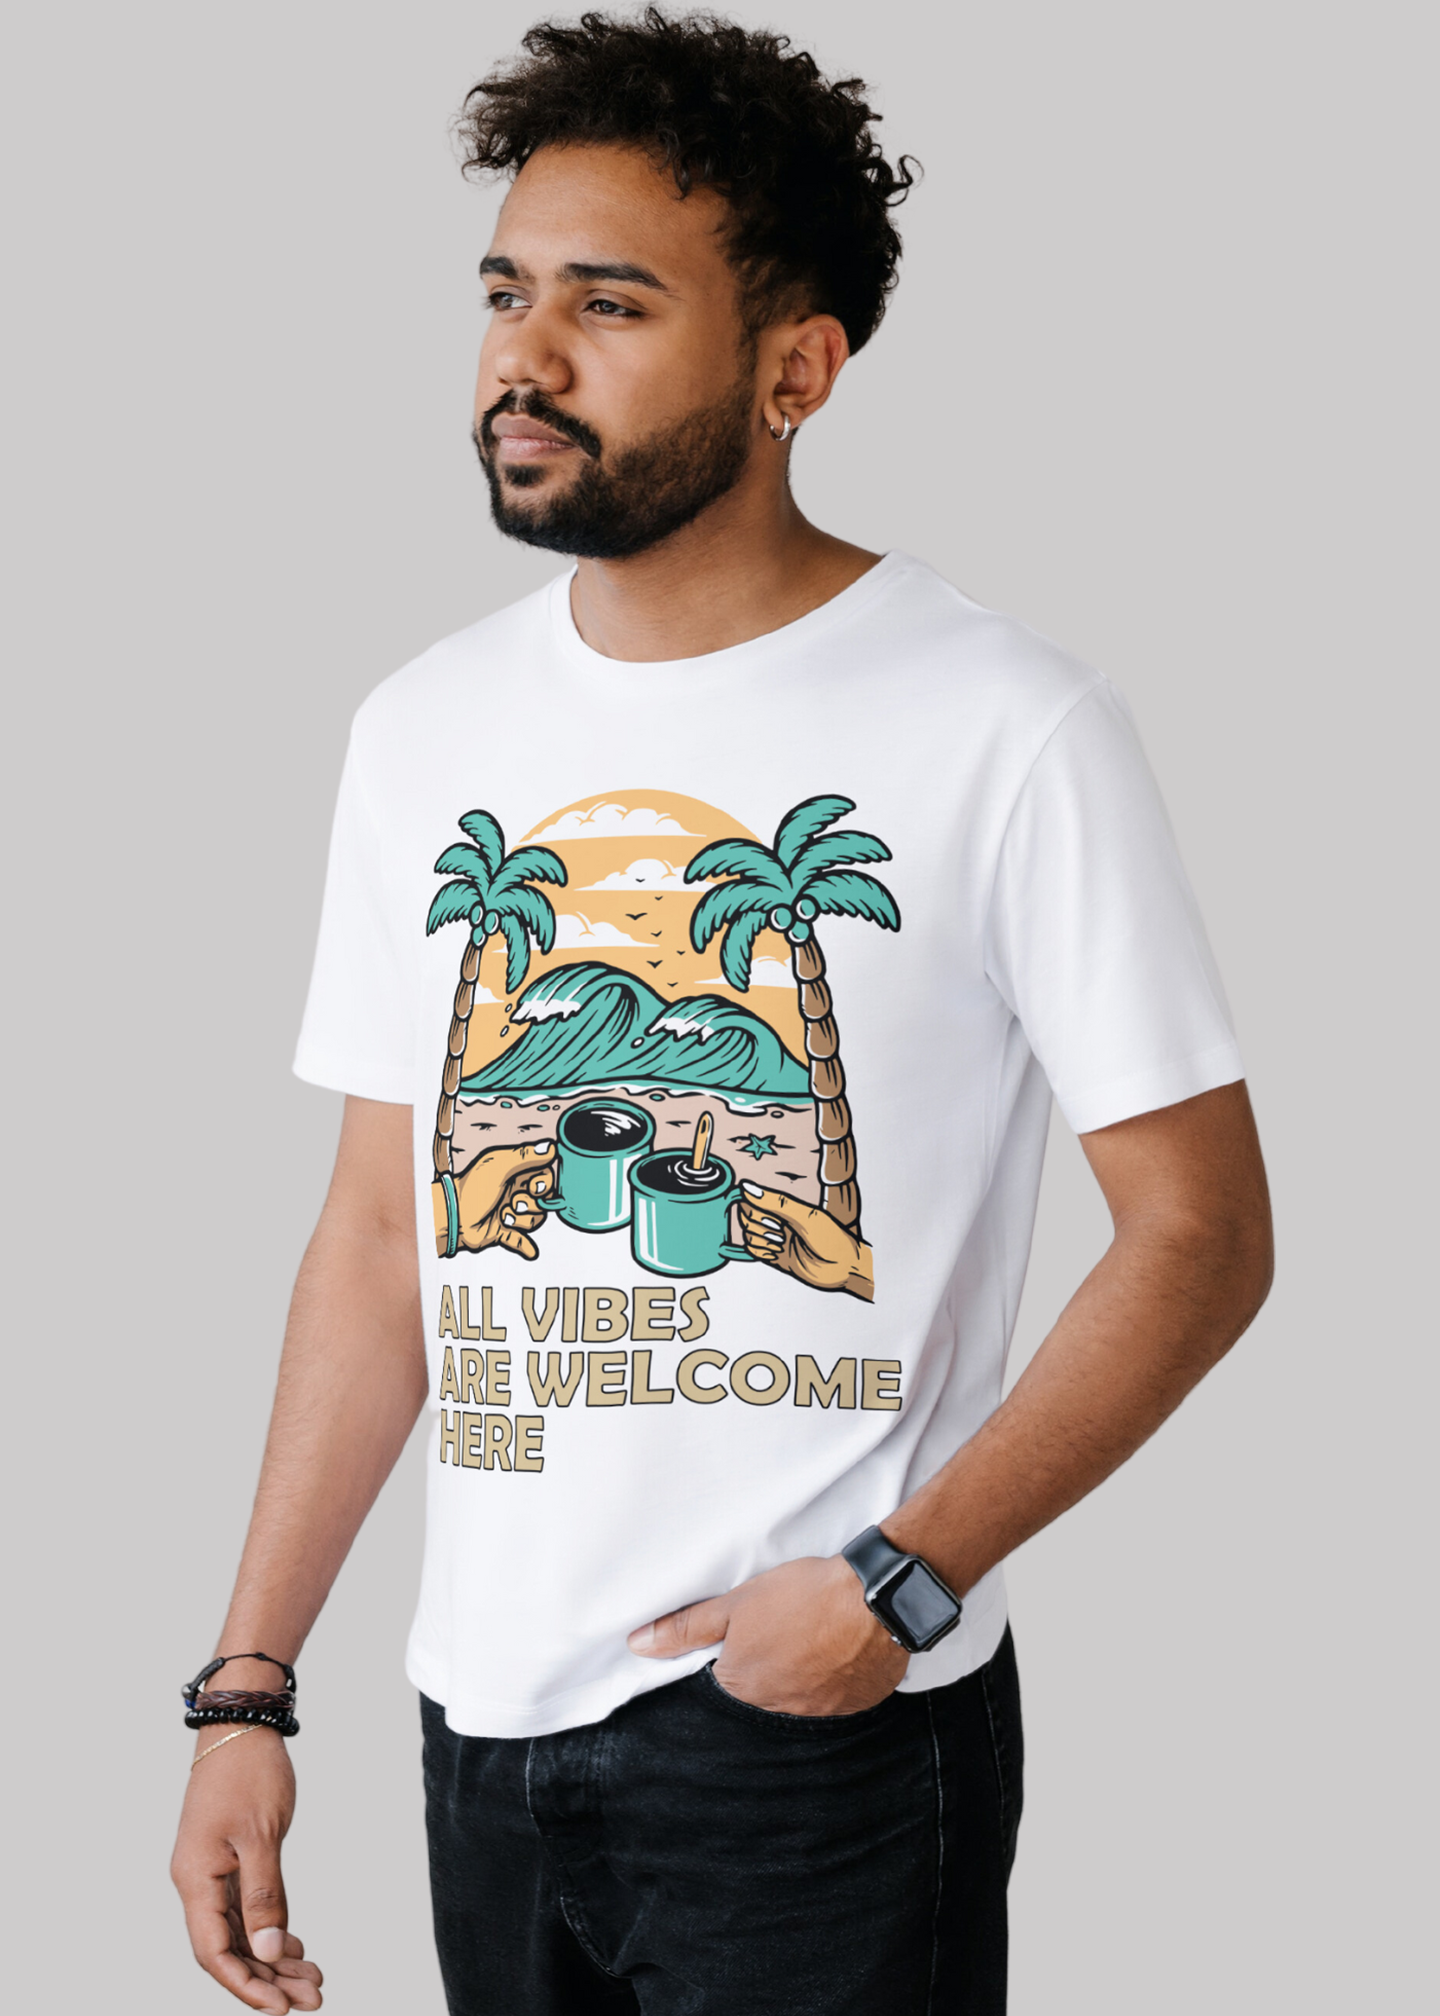 All vibes are welcome here Printed Half Sleeve Premium Cotton T-shirt For Men